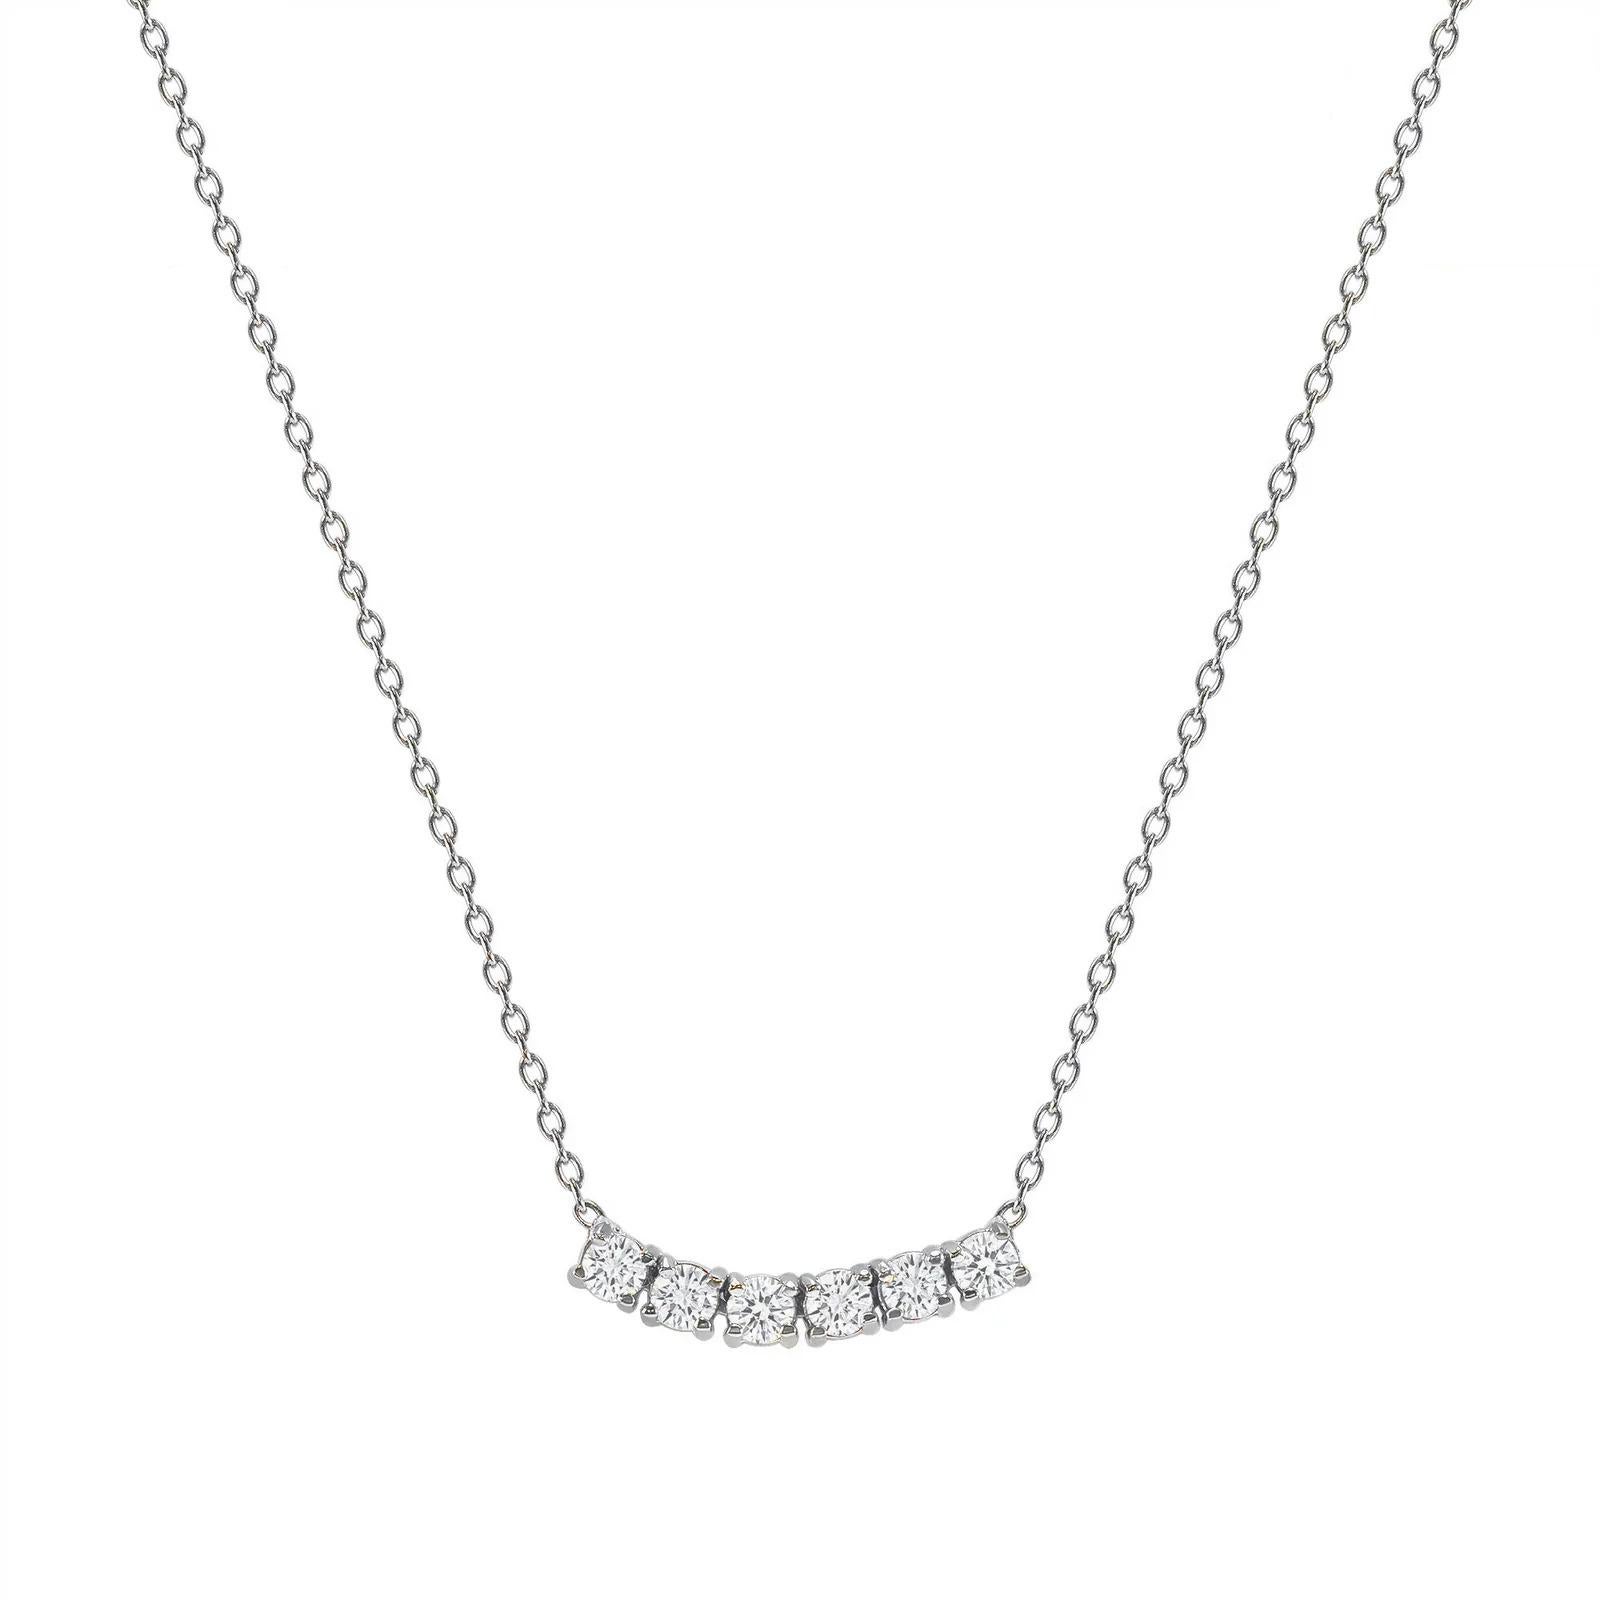 This petite, curved diamond necklace is crafted with gorgeous 14k gold set with six round diamonds.  

Gold: 14k 
Diamond Total Carats: 1.5 ct
Diamond Cut: Round (6 diamonds)
Diamond Clarity: VS
Diamond Color: F
Color: White Gold
Necklace Length: 20